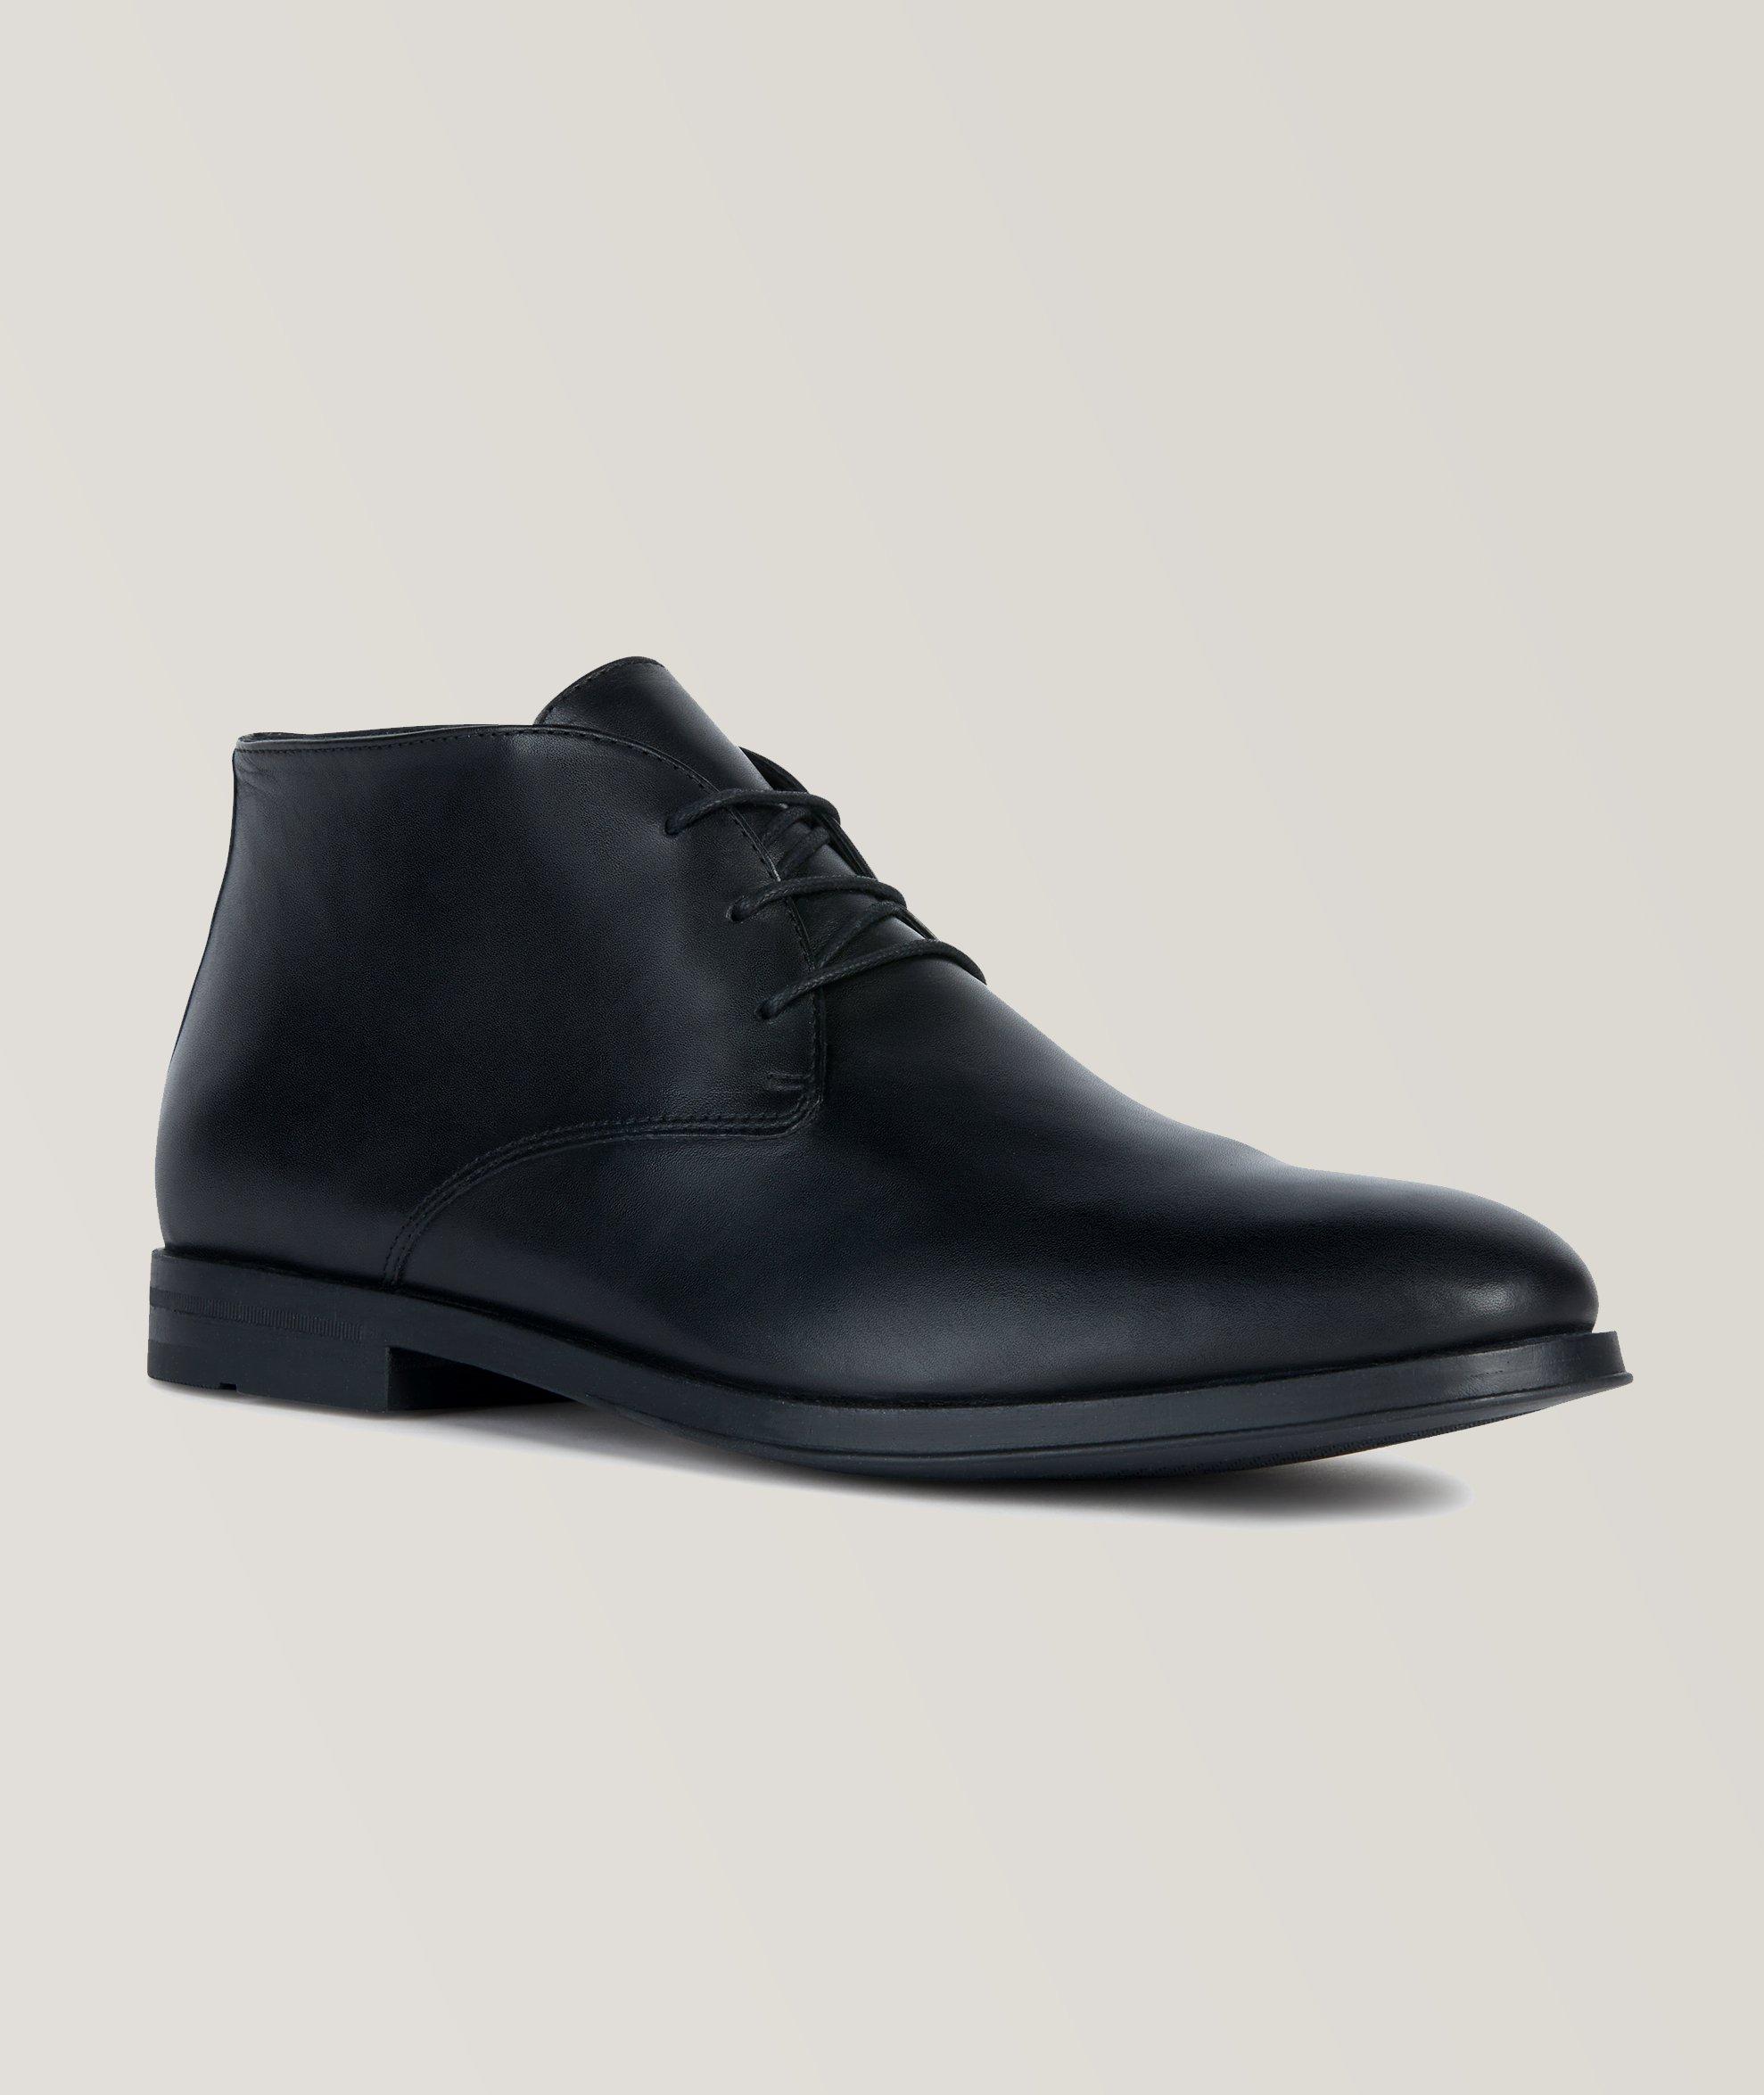 Decio Leather Ankle Boots